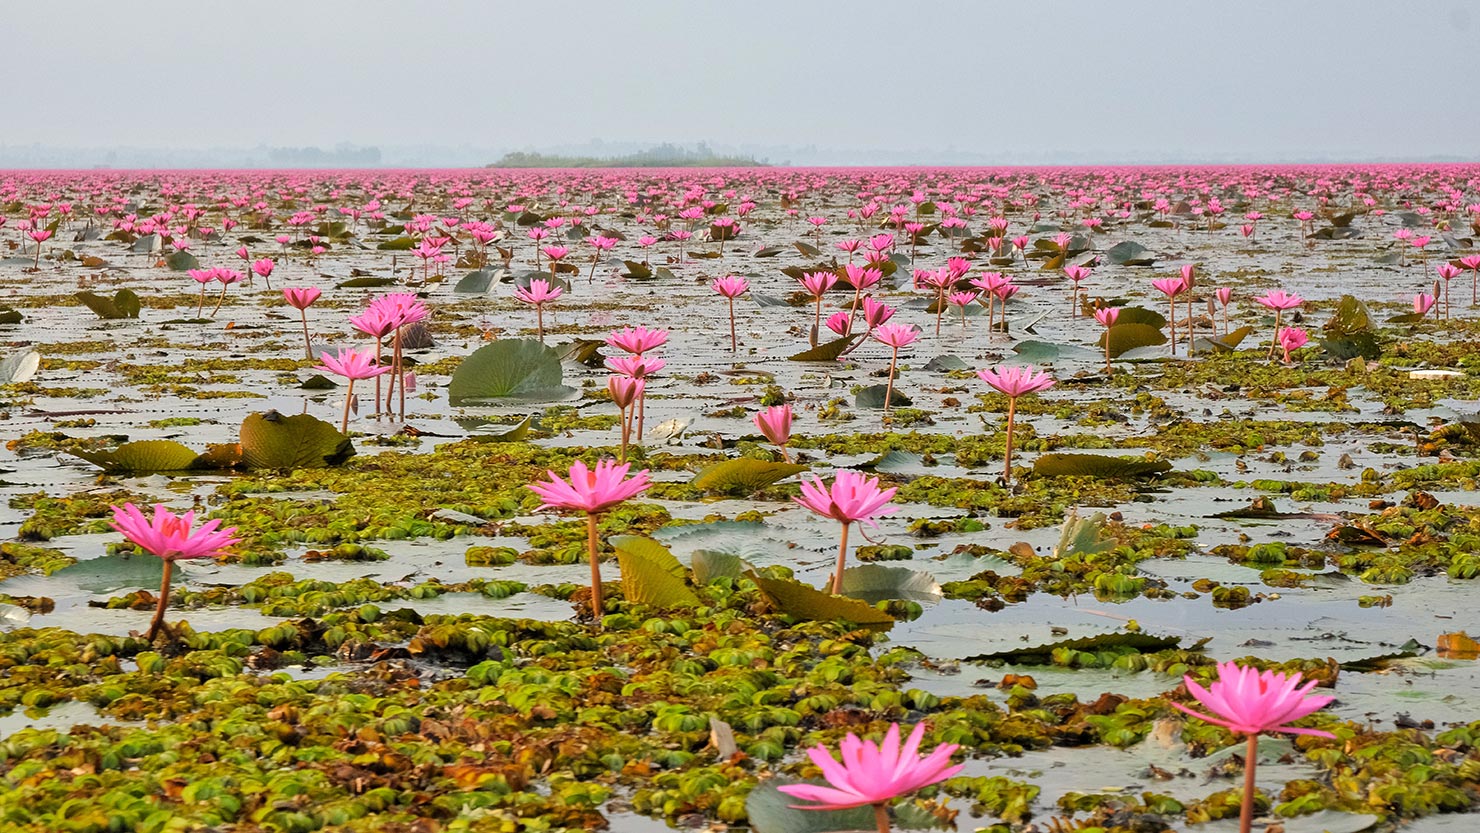 Pink lilies carpet the Red Lotus Lake as far as the eye can see